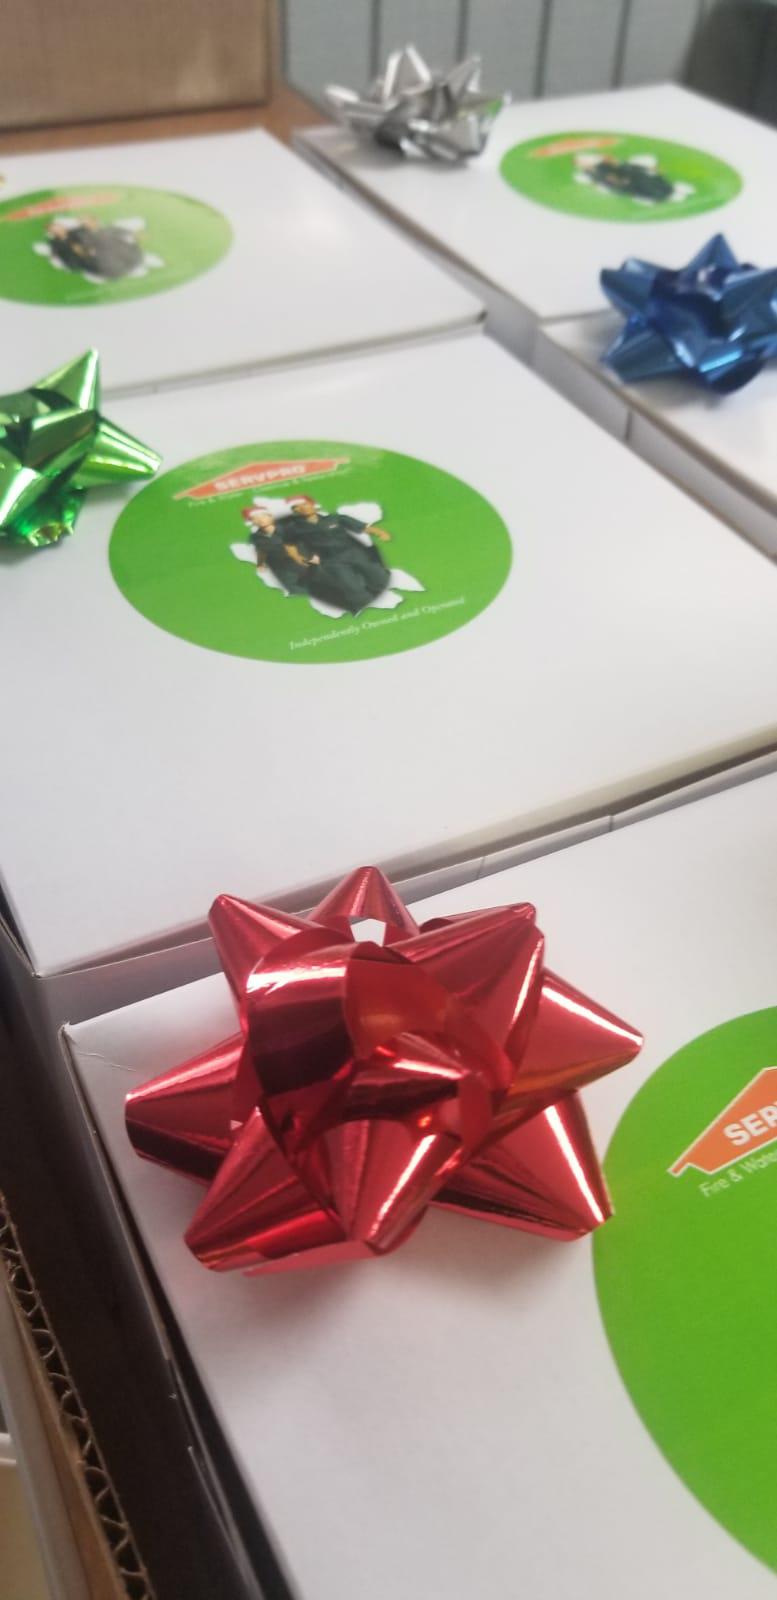 A little snippet of our world famous Cheesecake Christmas Presents to our dedicated clients & buildings!